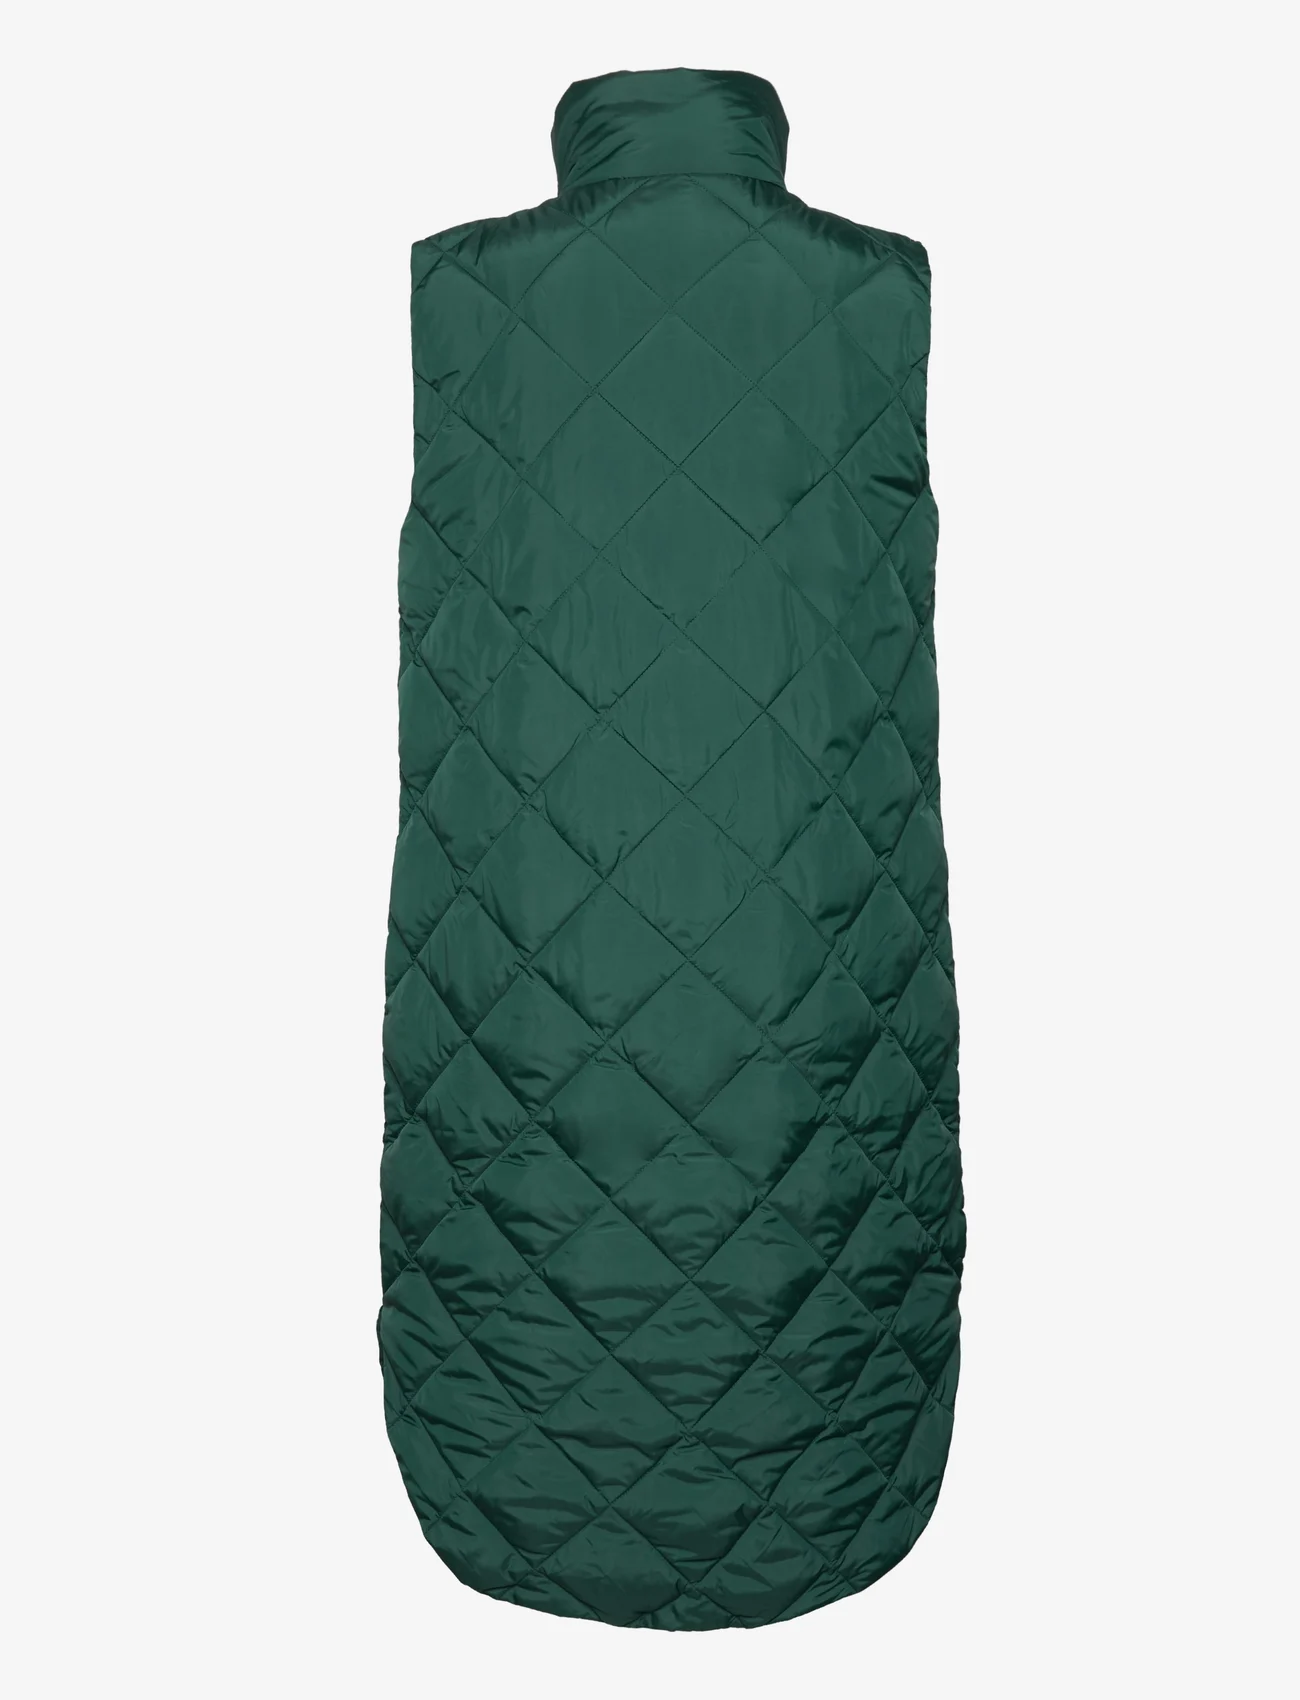 FREE/QUENT - FQOLGA-WA - quilted vests - rainy forest - 1